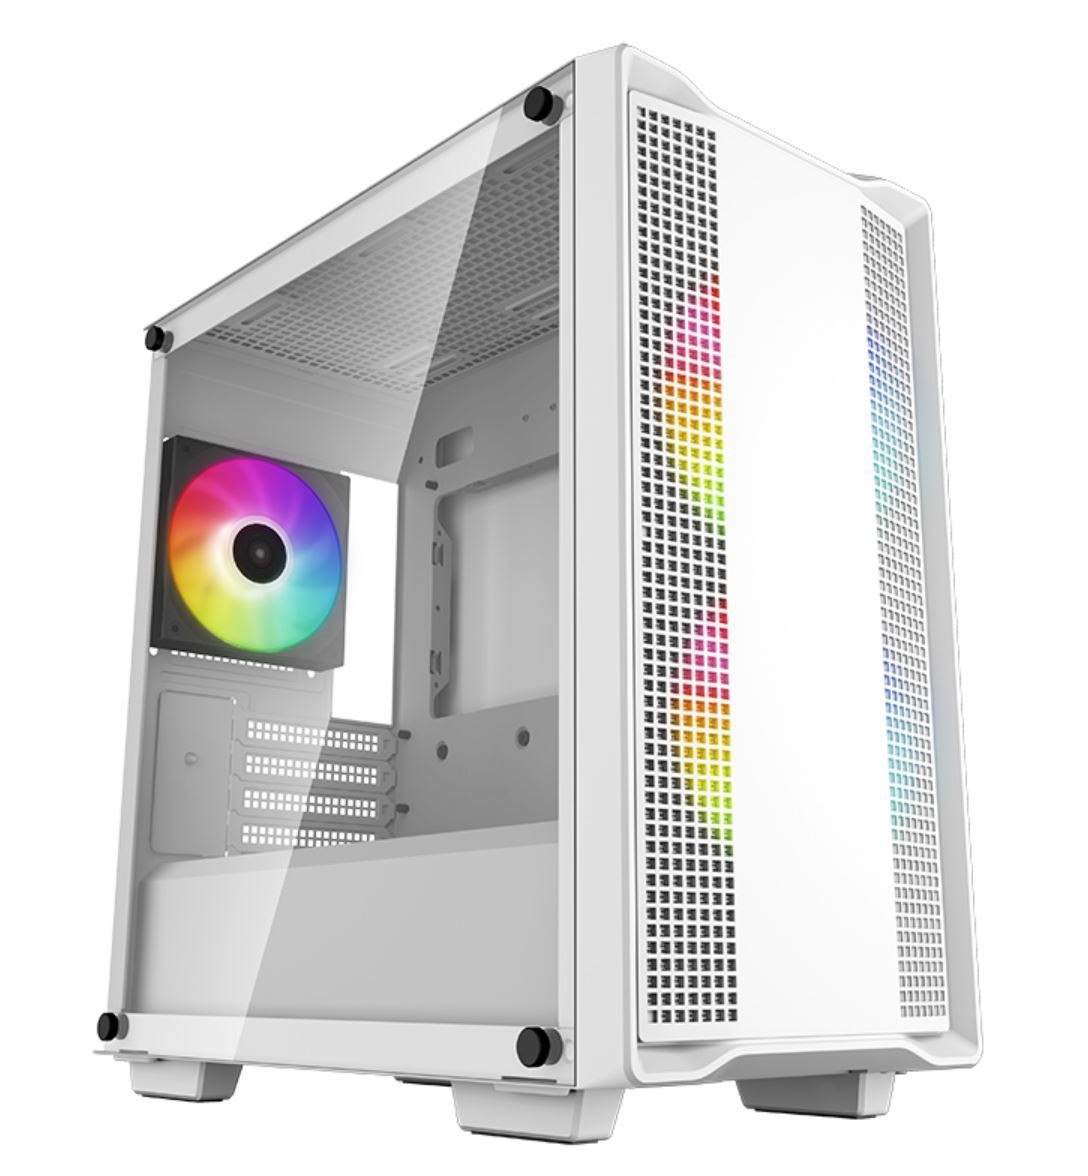 DeepCool CC360 Argb White Micro-ATX Case 3 Pre-Installed Argb Fans Liquid Cooling Up To 360mm,Tempered Glass Panel,